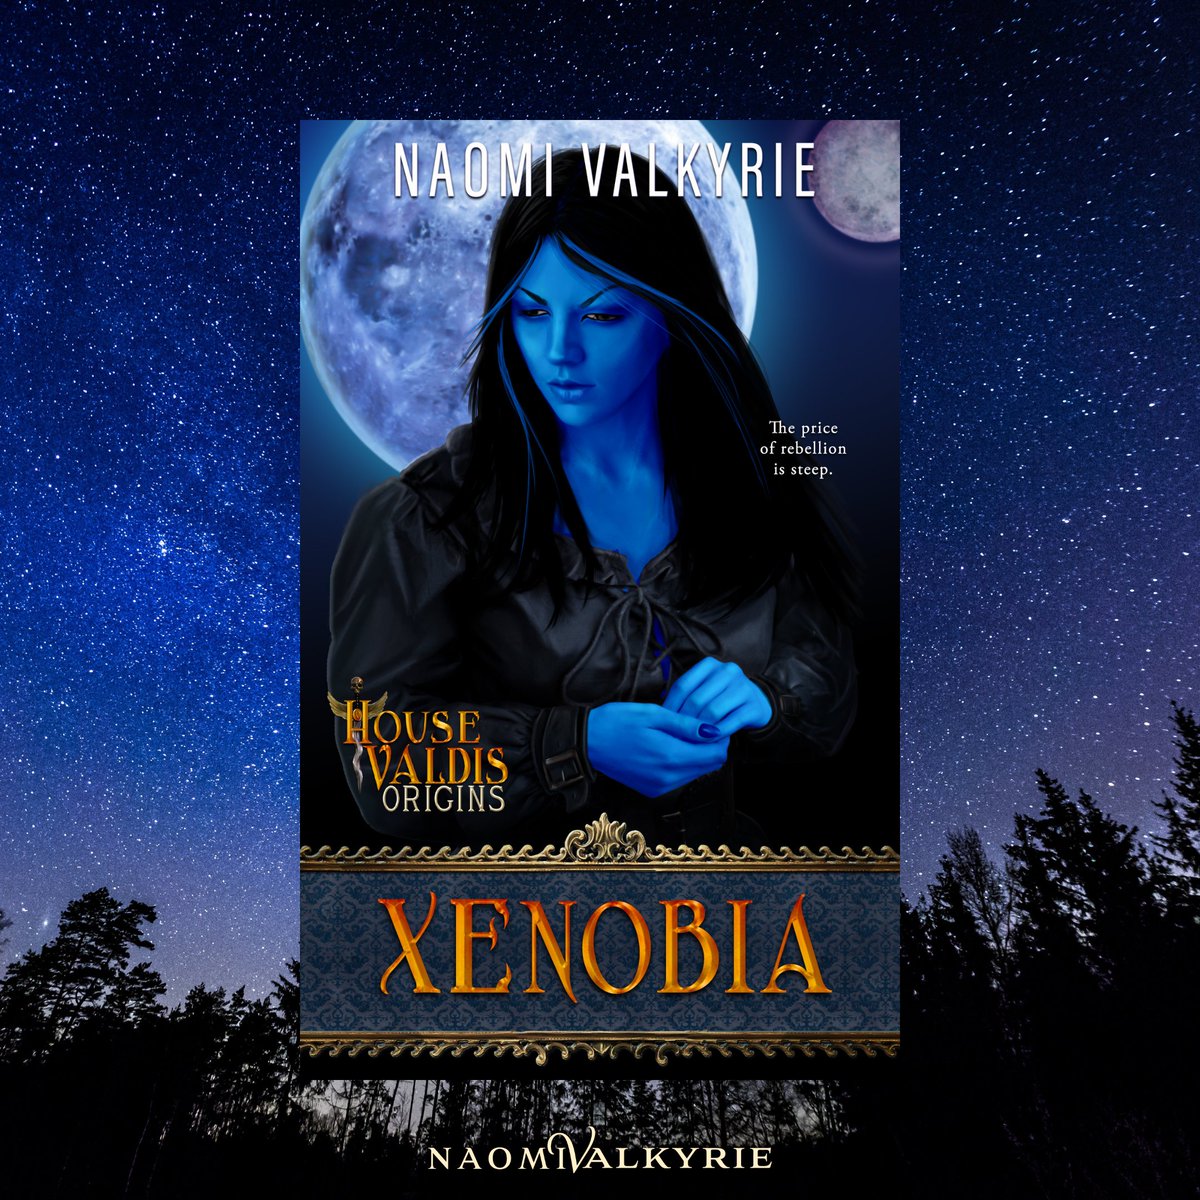 dl.bookfunnel.com/a6v9q4kqvd
The price of rebellion is steep.
Download this free prequel today!
#readingcommunity #readerscommunity #whattoread #bookstoread #NaomiValkyrie #readersoftwitter #BookTwitter #booktwt